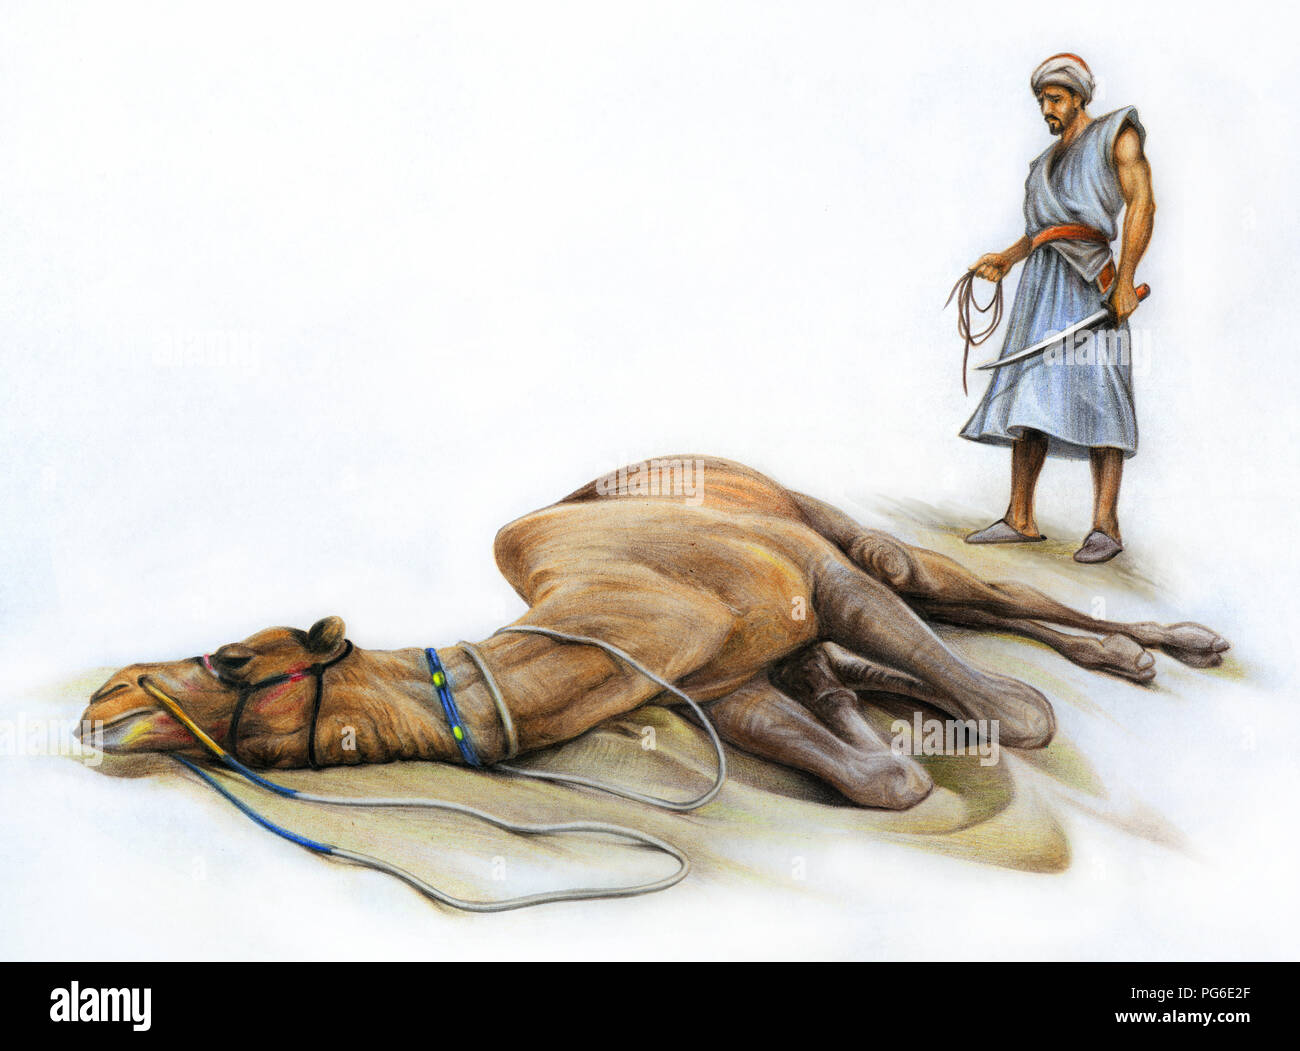 Camel and Butcher, Colored Pencil Stock Photo